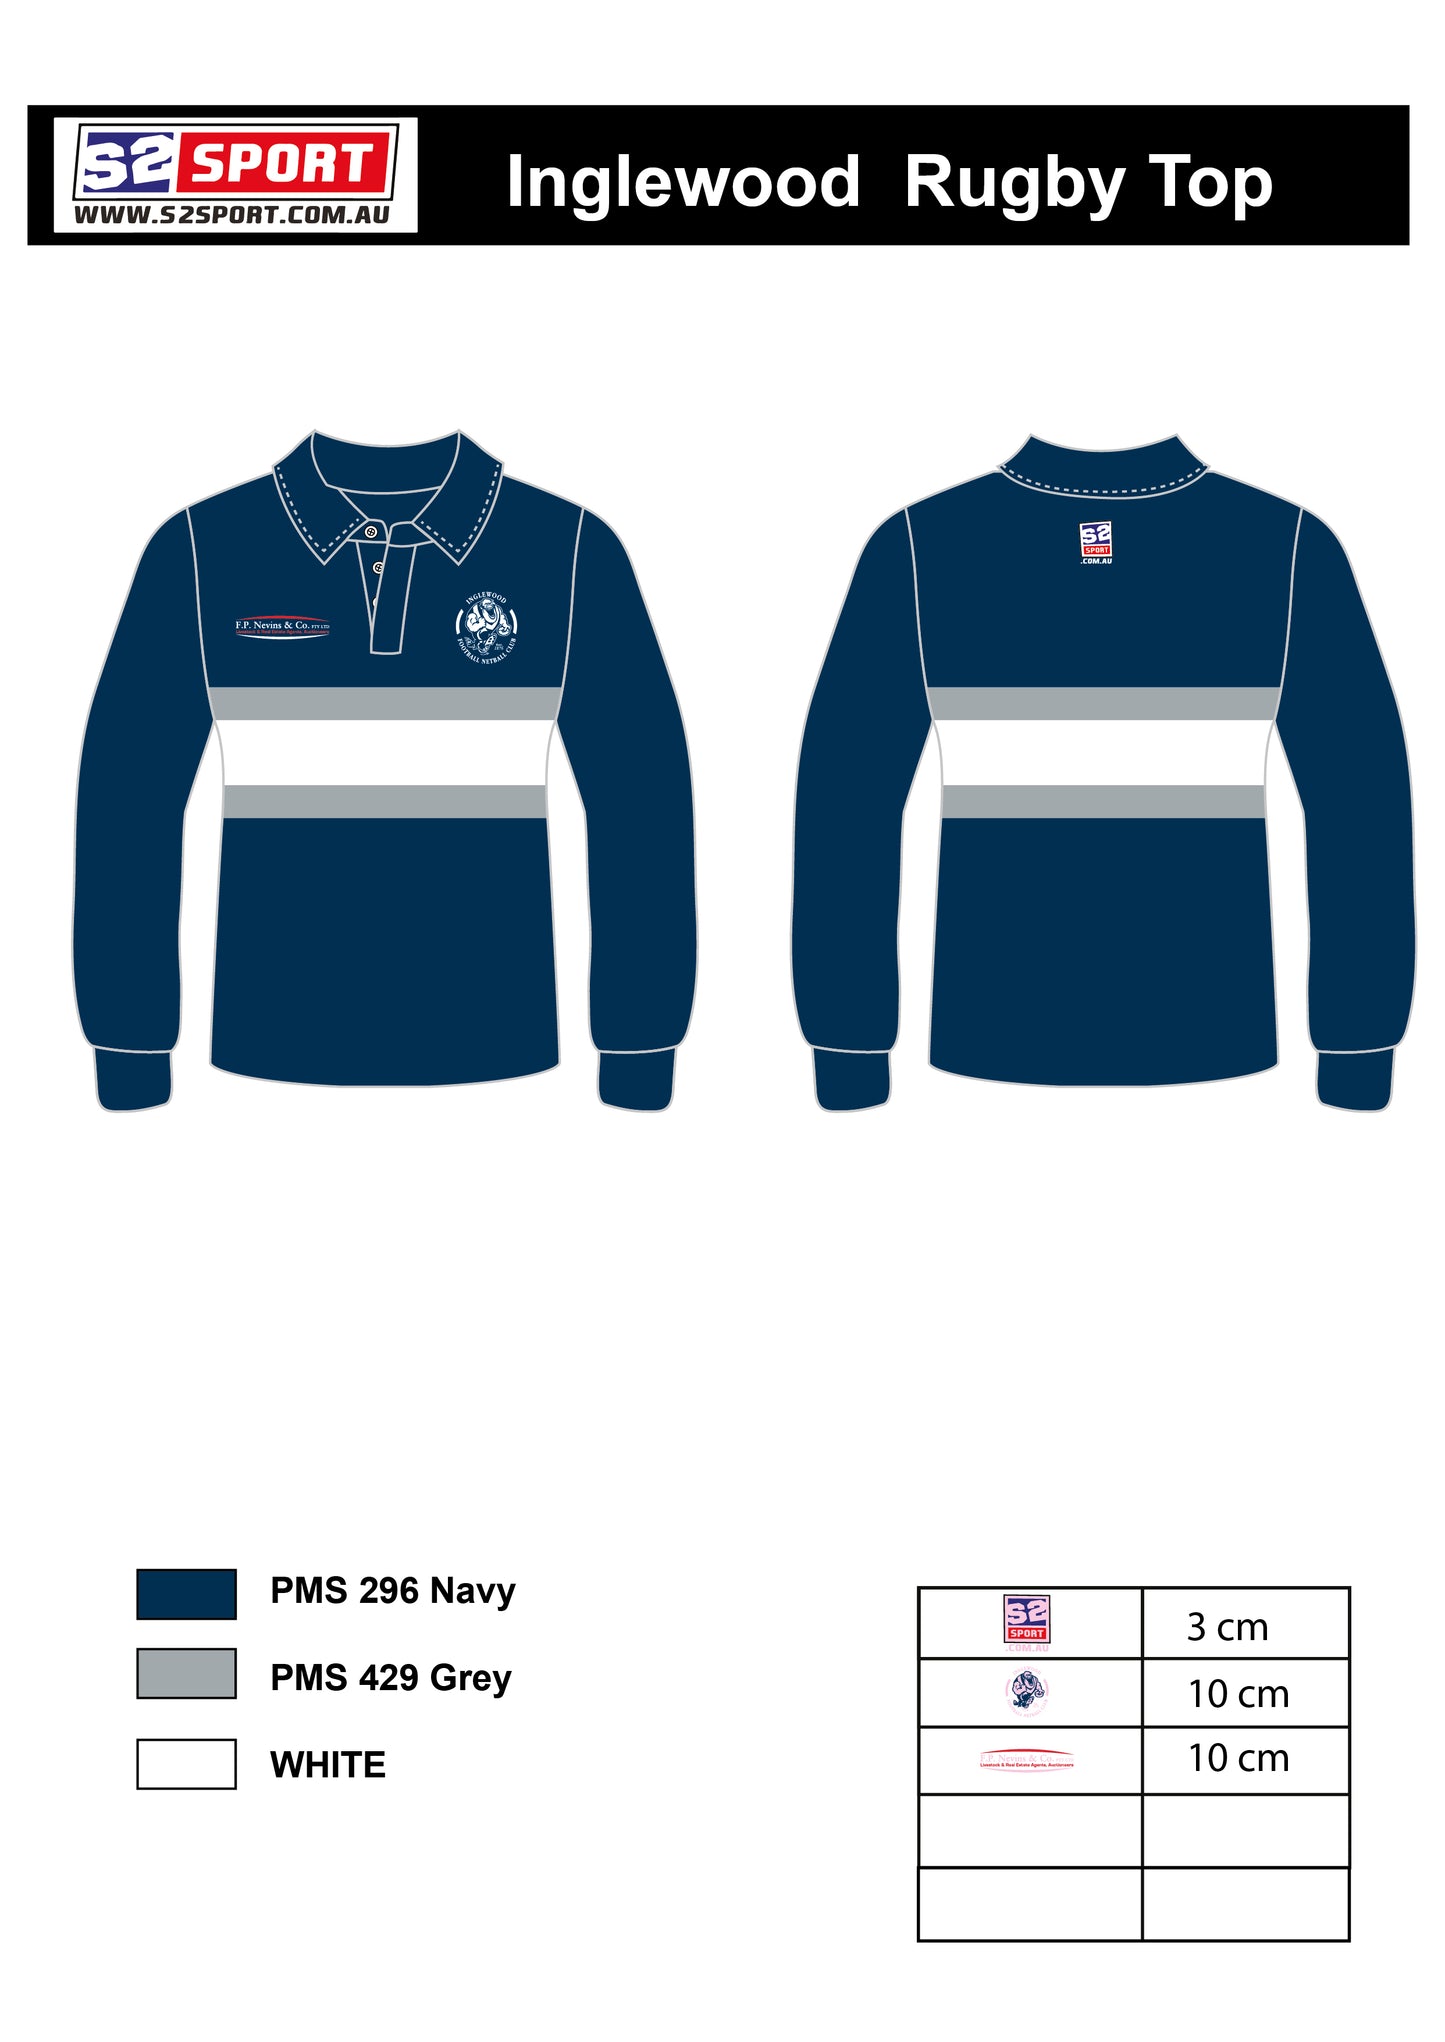 Inglewood Football and Netball Club Rugby Top